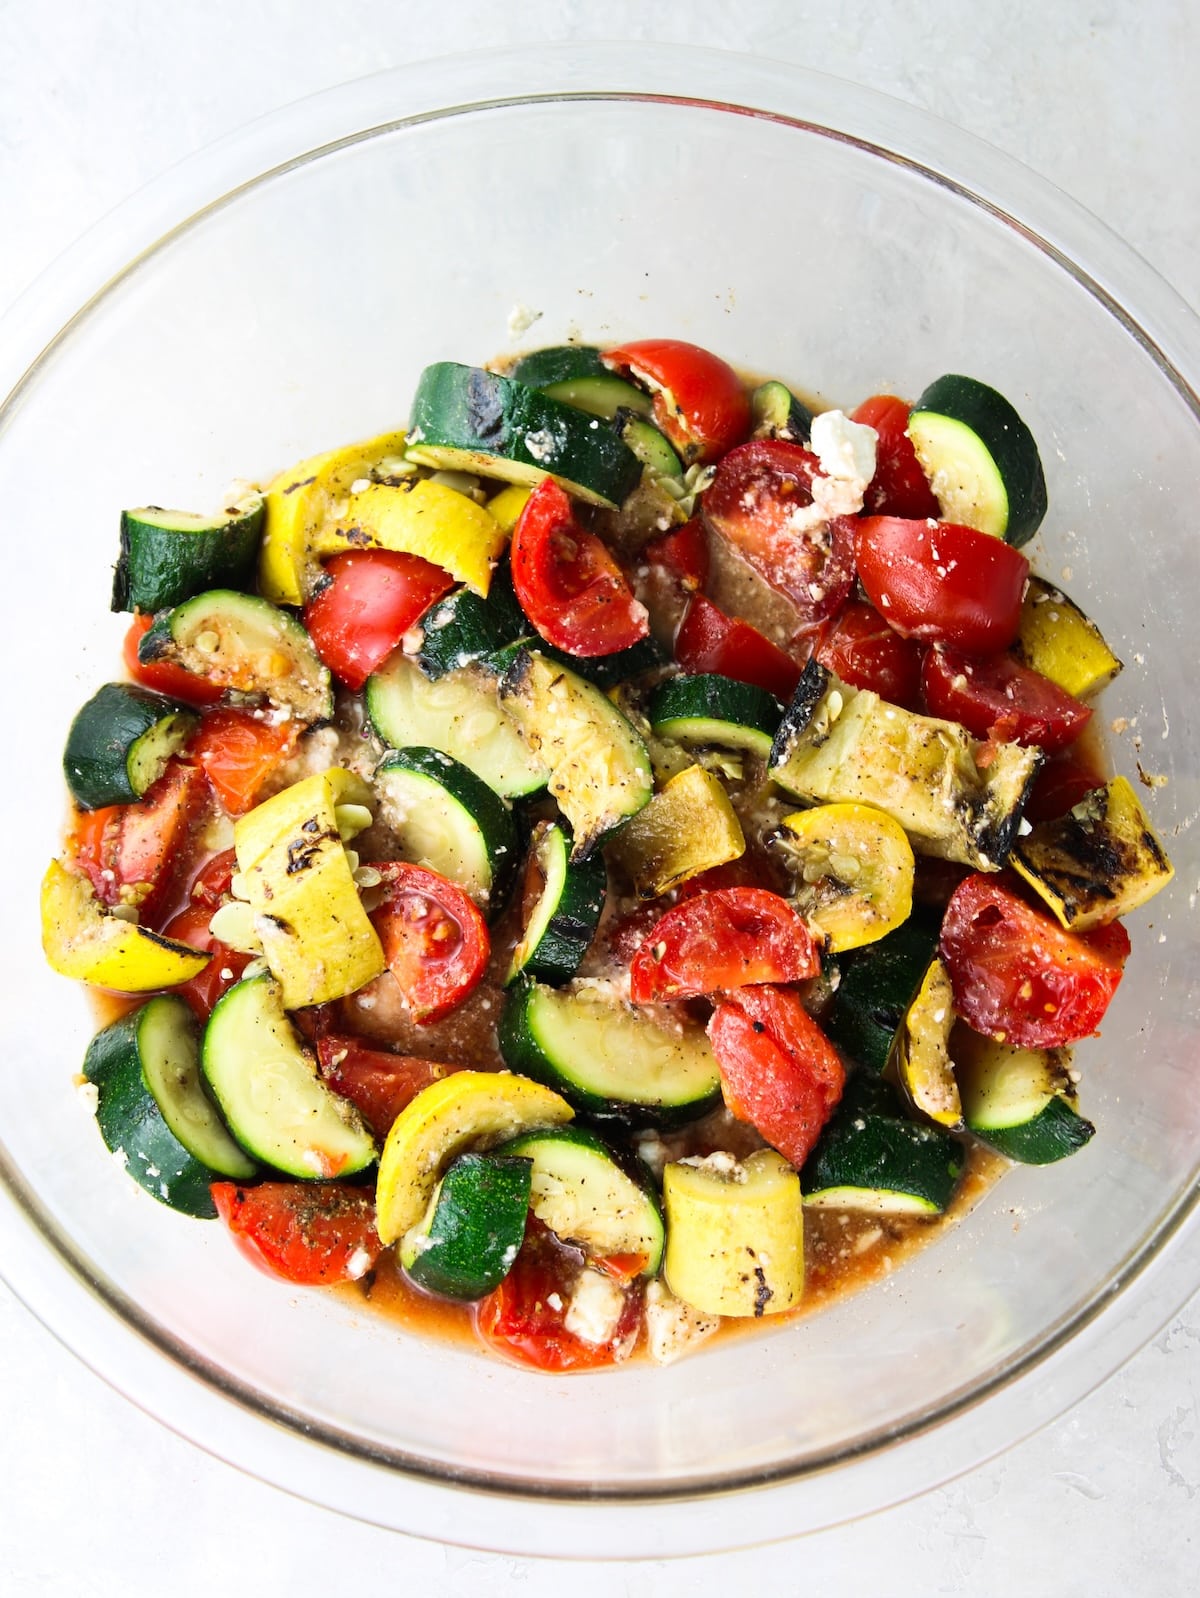 Squash and zucchini added to the bowl of tomatoes with feta.